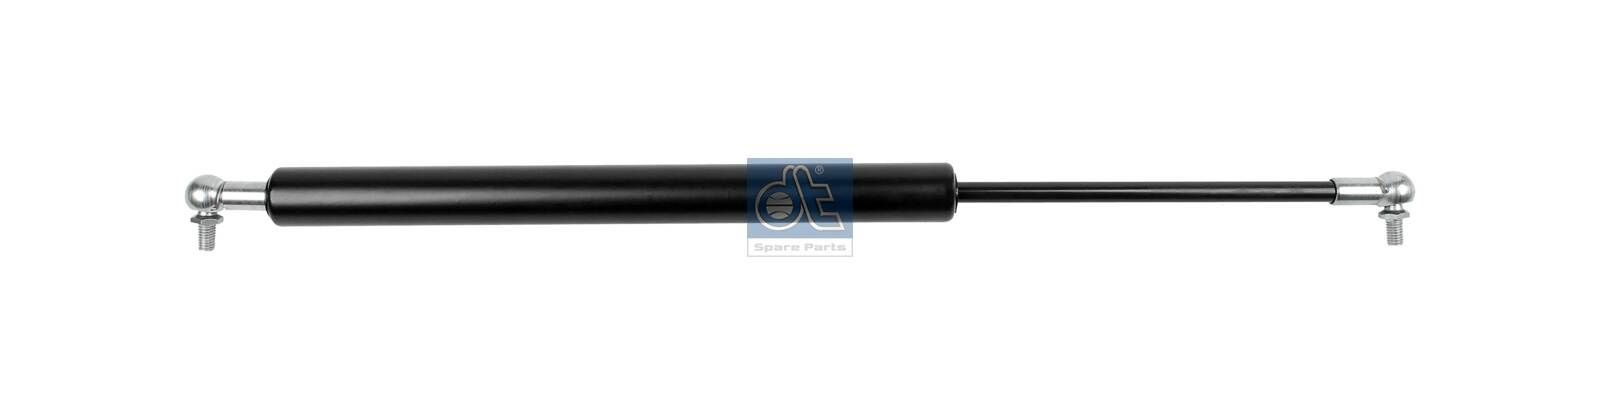 95874 DT Spare Parts 1200N, 540 mm Gas Spring 3.80762 buy